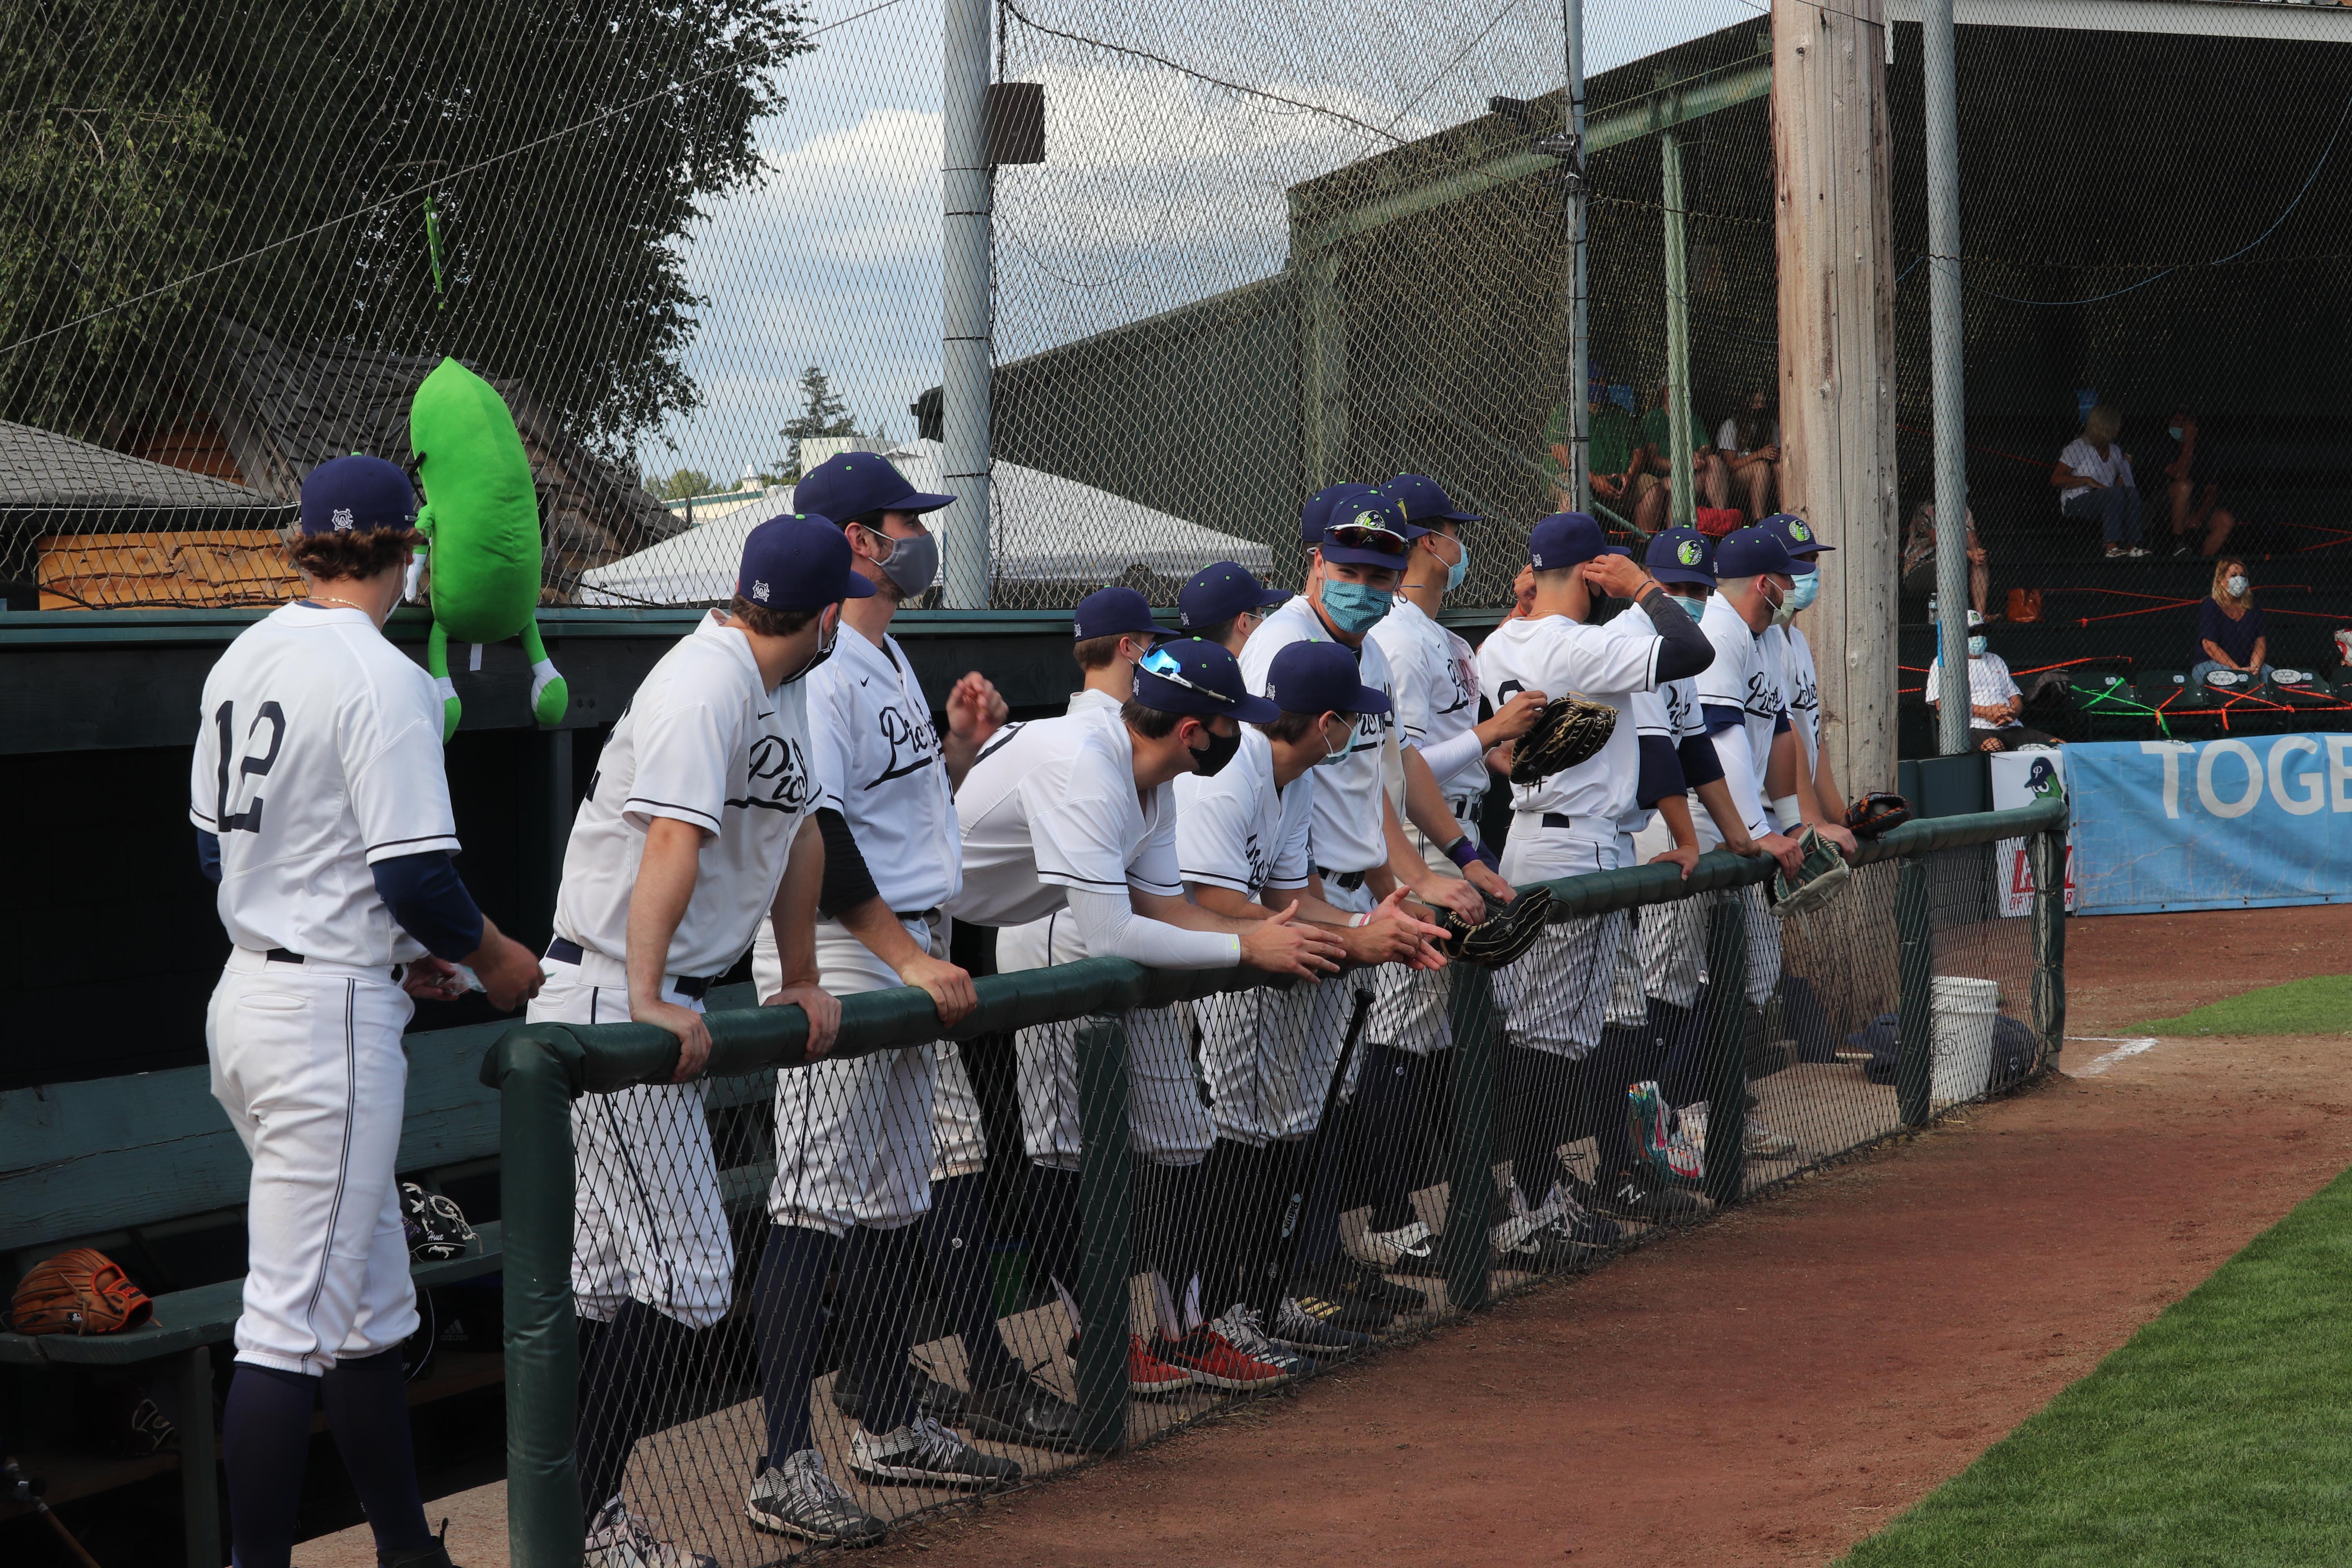 MLB shrinks the minor leagues, bringing good news to Hillsboro and